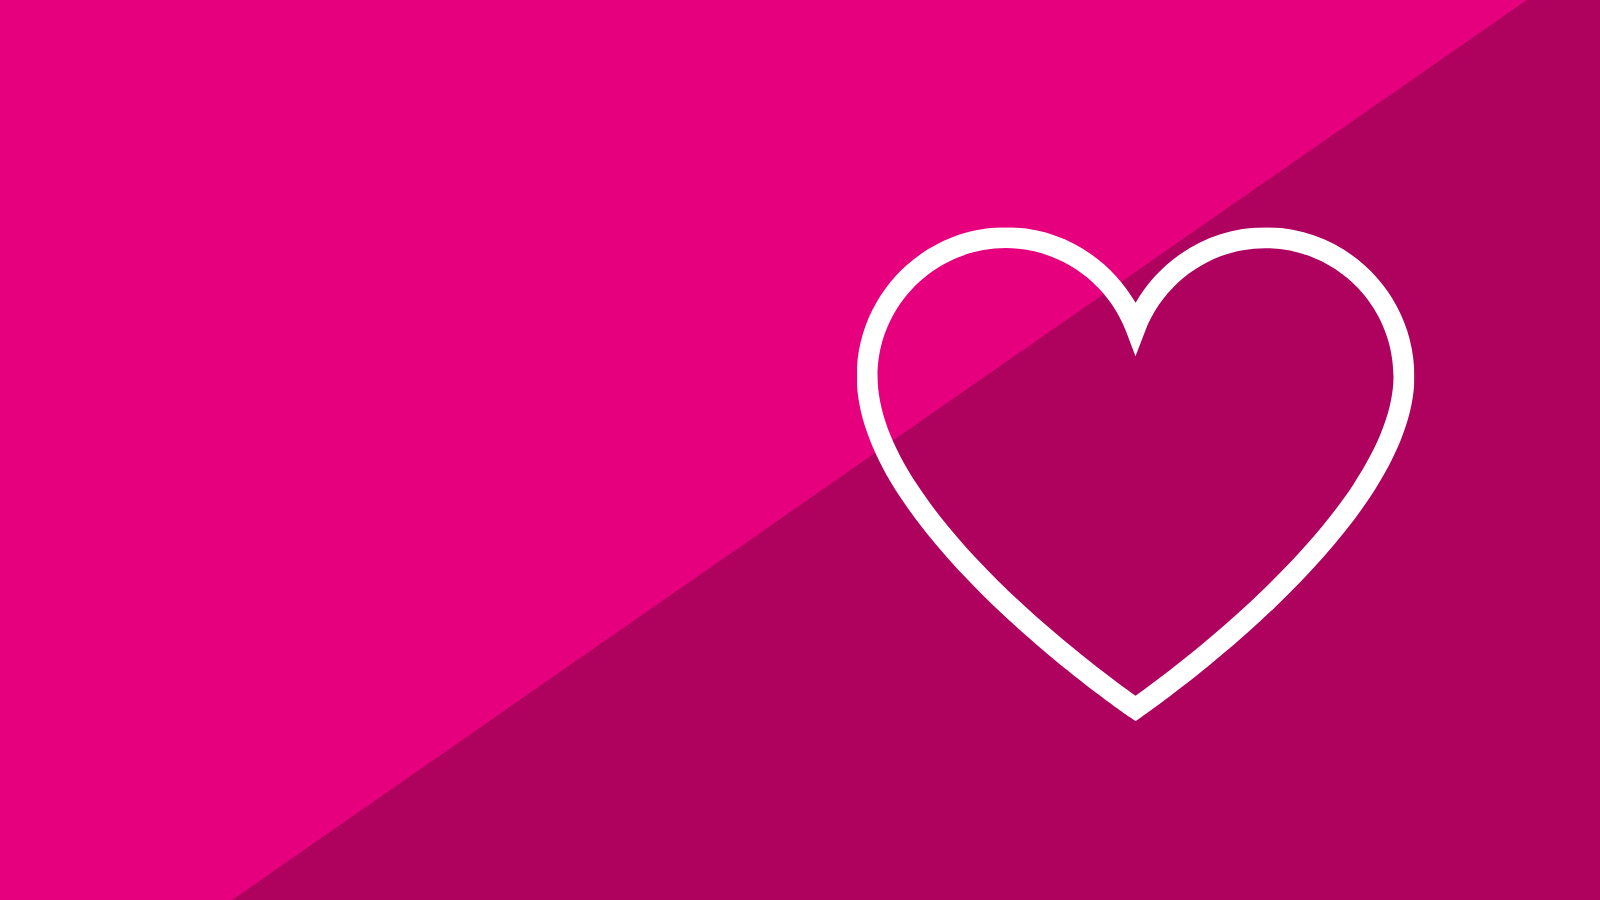 Pink background, graphic of a heart.